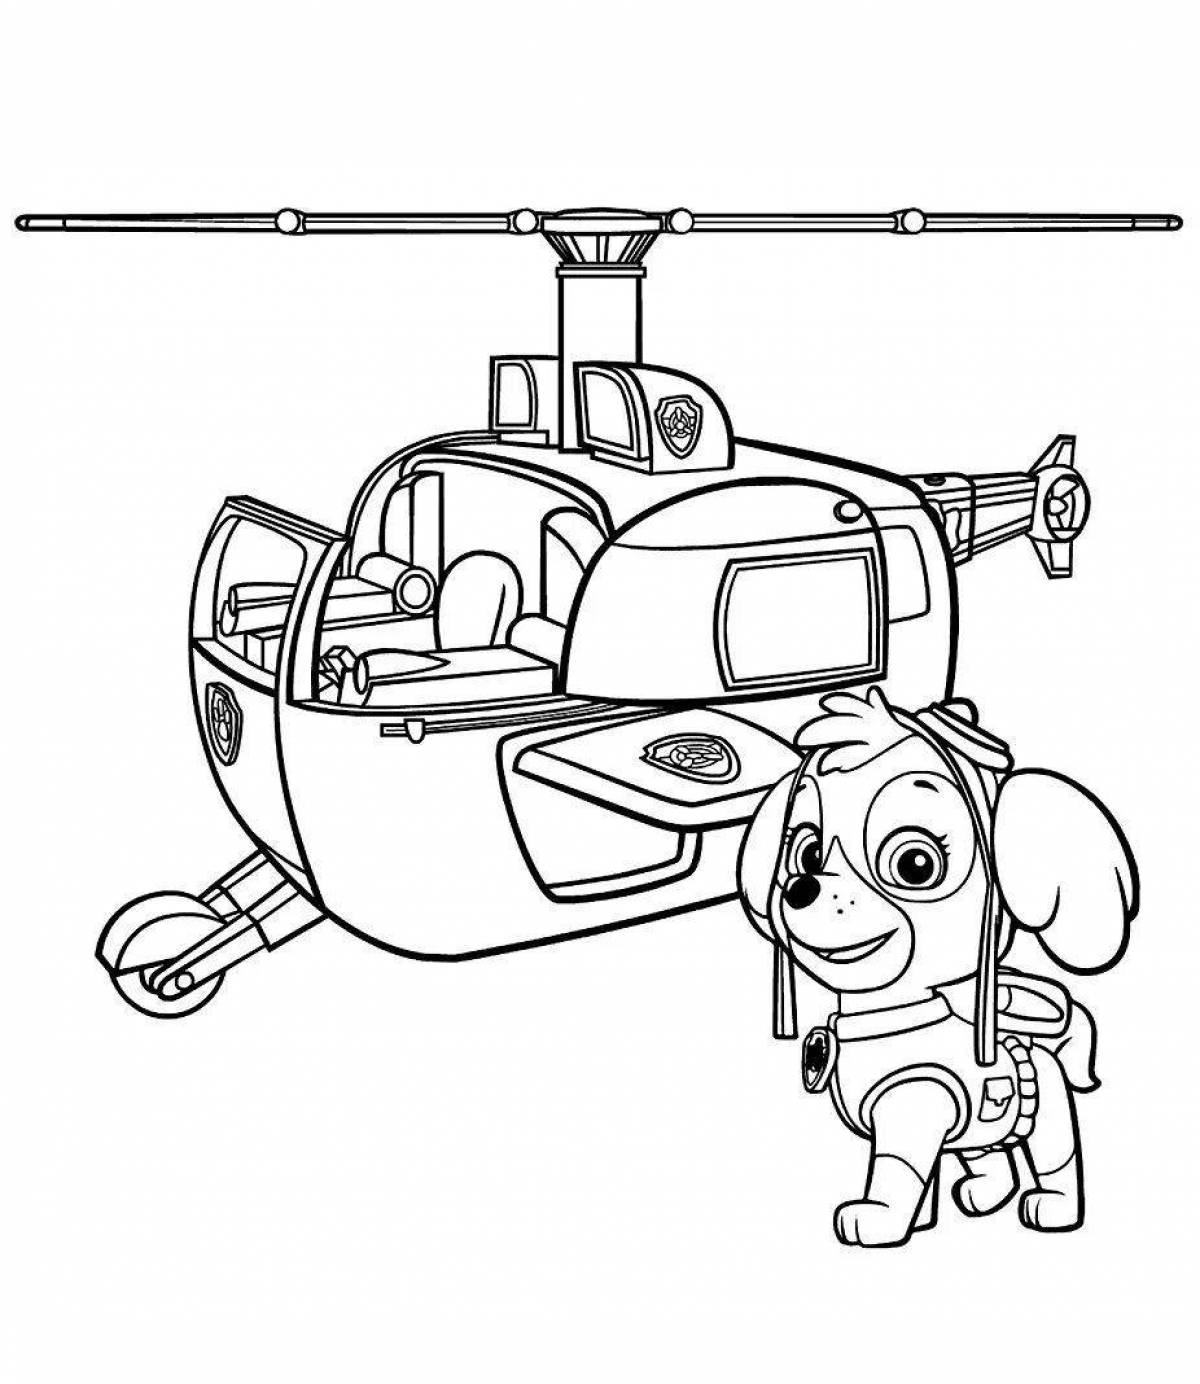 Exquisite coloring page paw patrol with cars